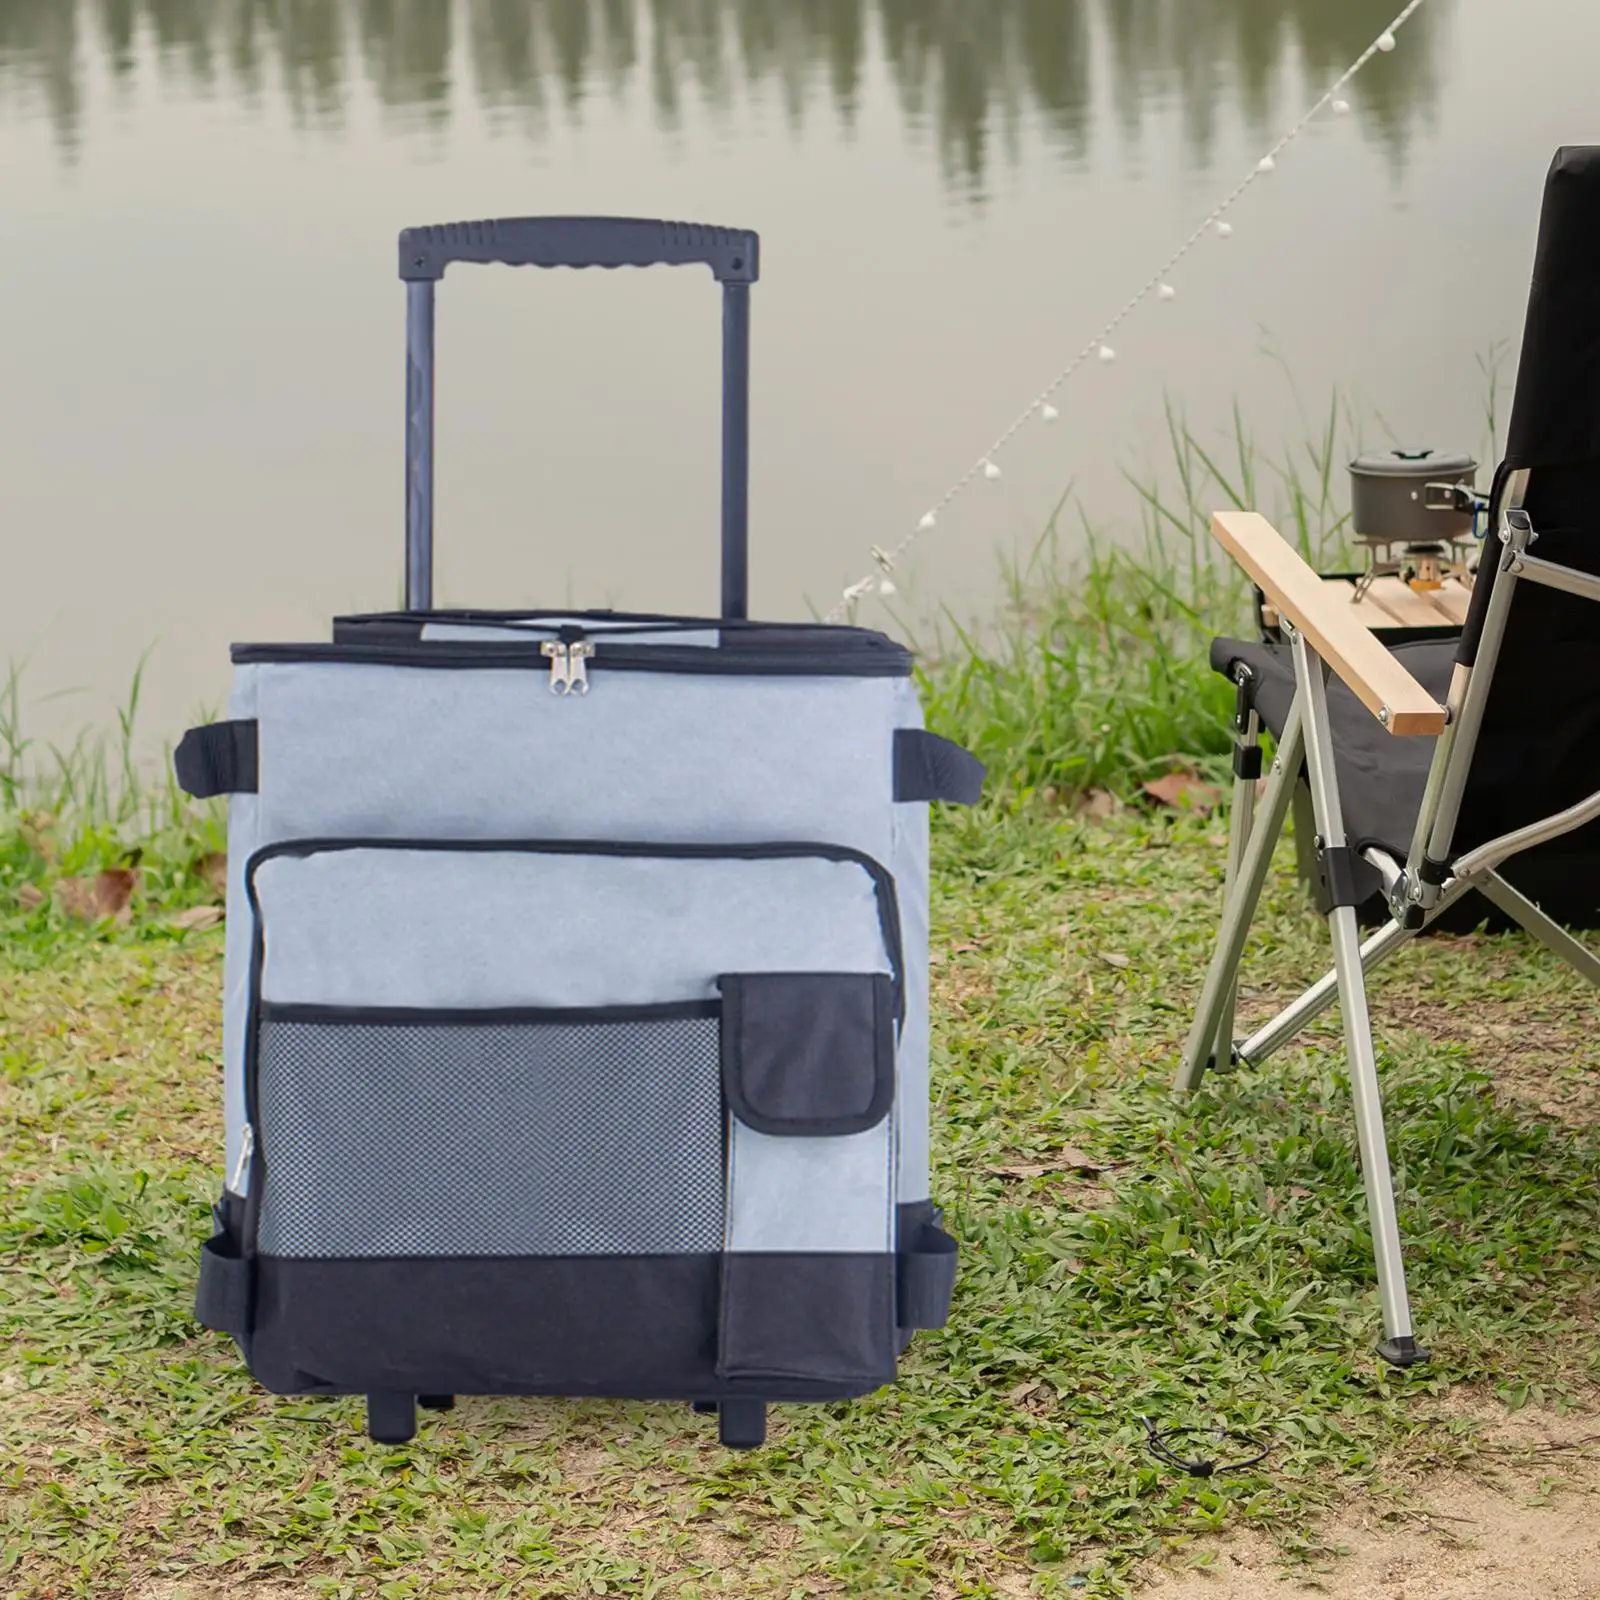 Collapsible Cool Bag Portable with Pocket Collapsible Rolling Cooler Rolling Cart Cooler Bag for BBQ Outdoor Travel Car Work